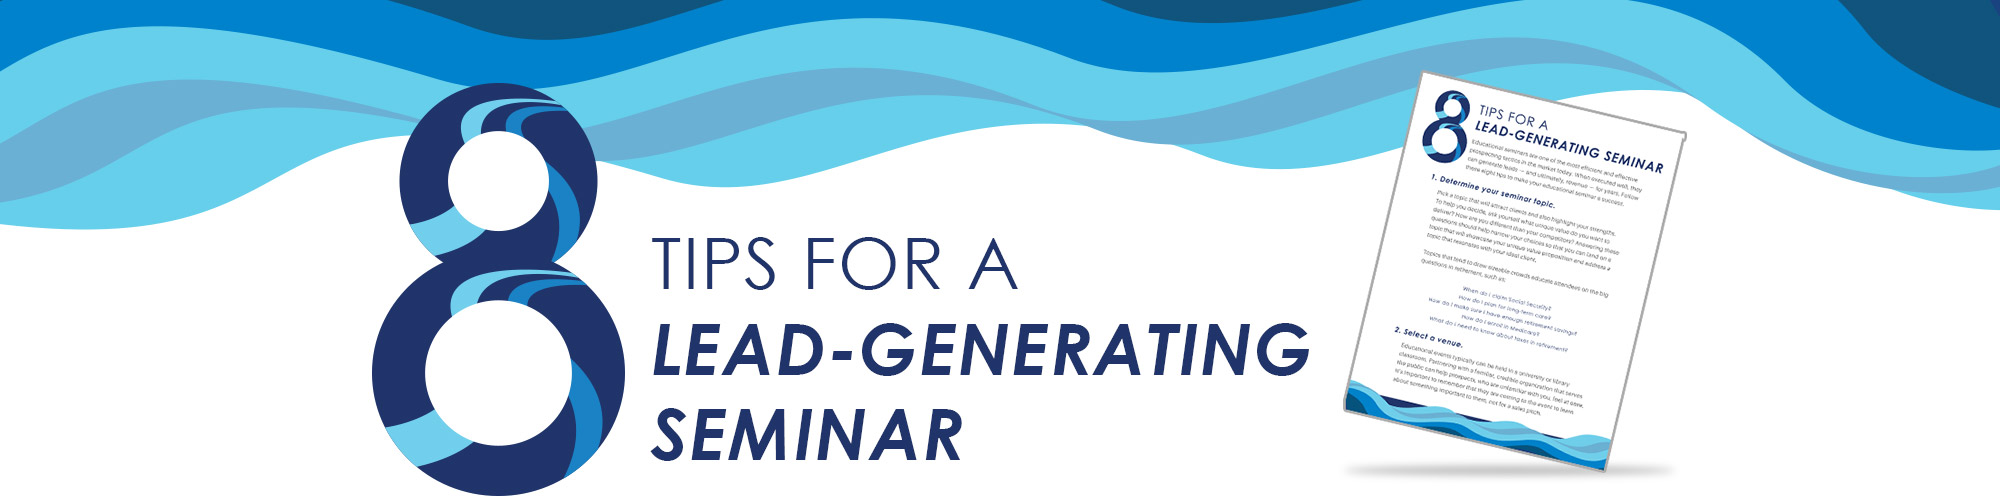 8 Tips for a Lead-Generating Seminar